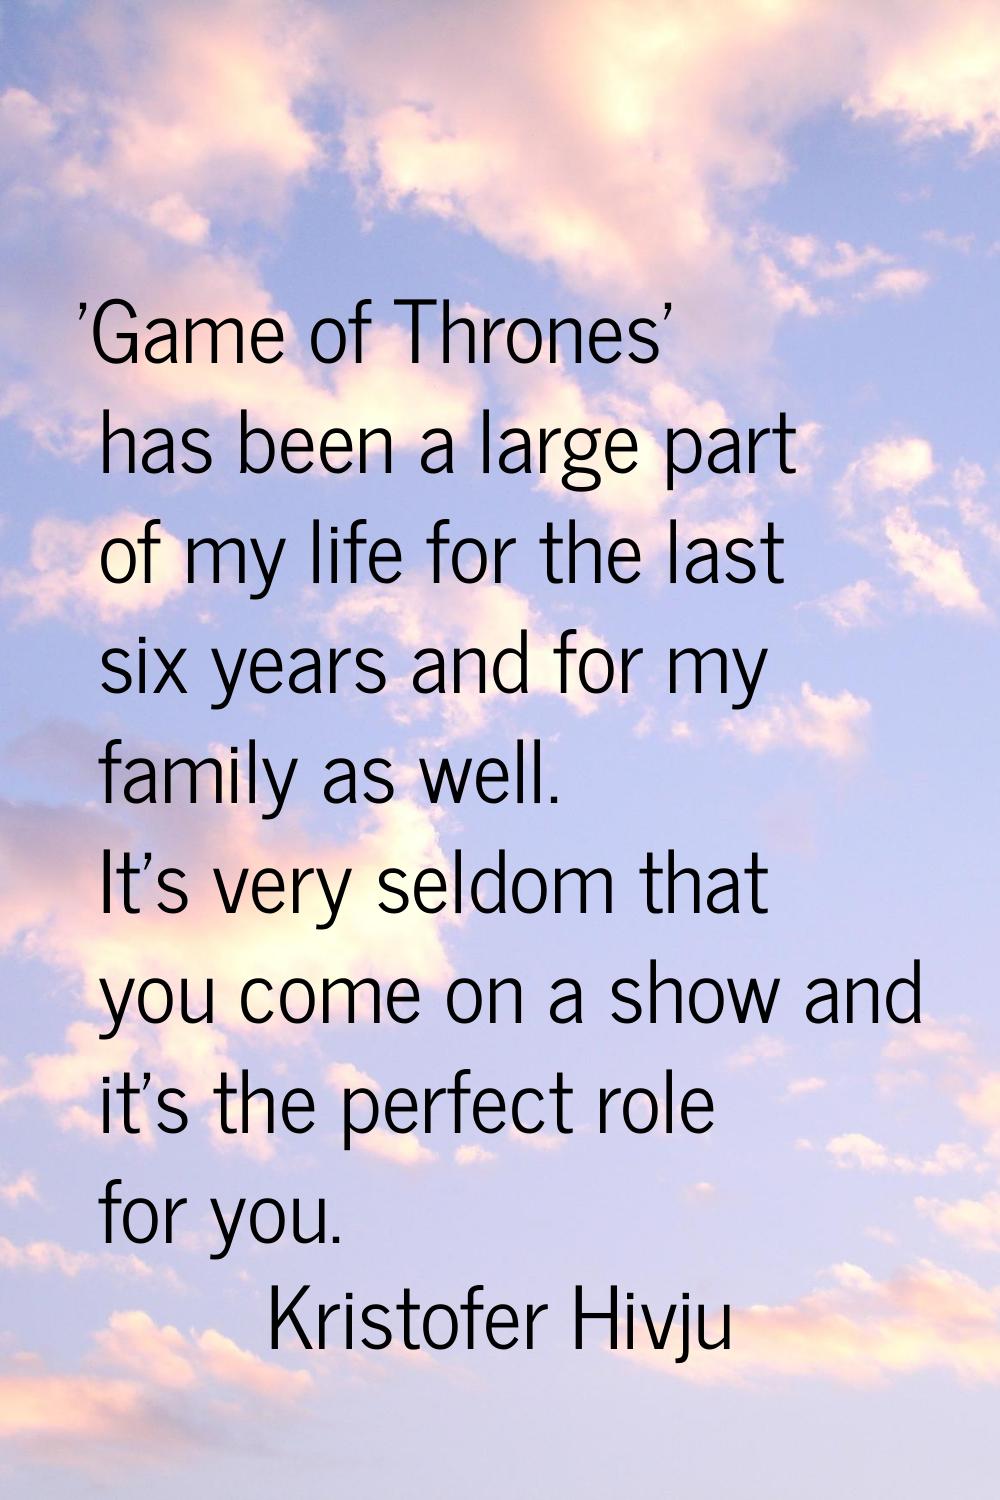 'Game of Thrones' has been a large part of my life for the last six years and for my family as well